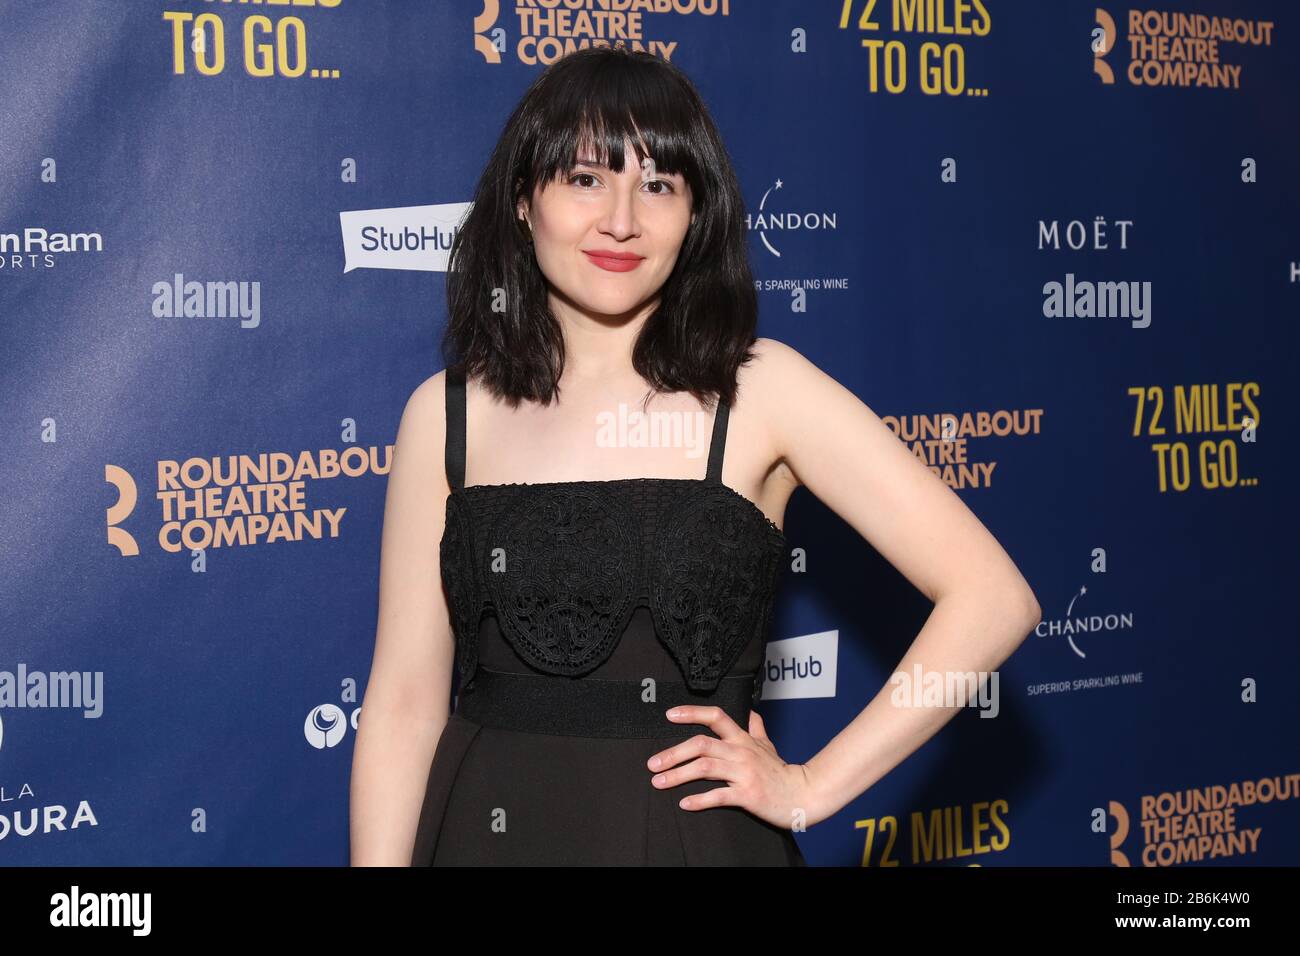 New York, NY, USA. 10th Mar, 2020. Jacqueline Guillen at the opening night  party for Roundabout Theatre Company's 72 Miles To Go at the Laura Pels  Theatre on March 10, 2020, in